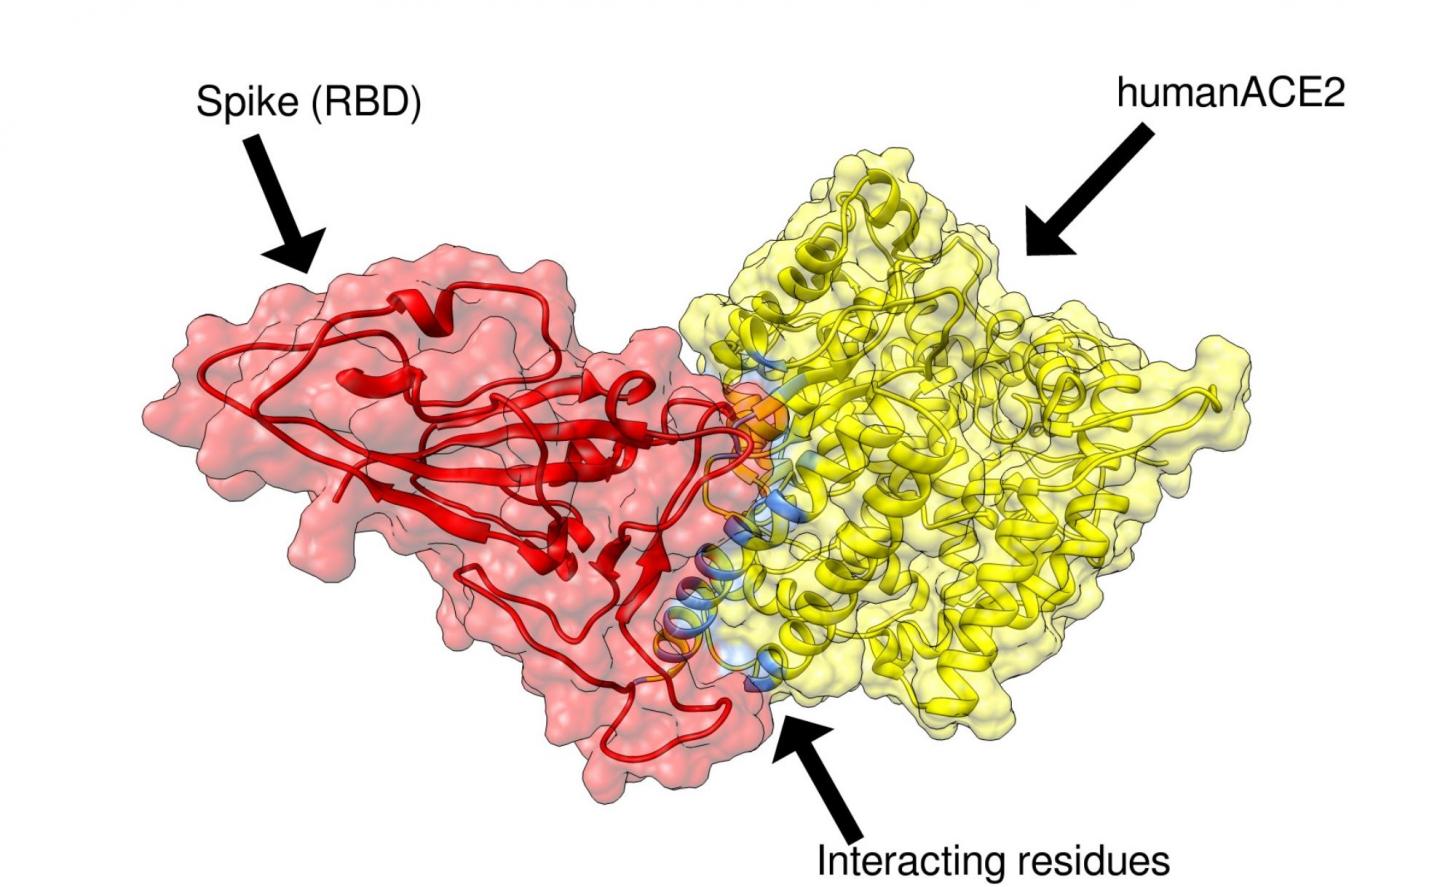 Computer simulated model of COVID-19 spike protein binding to the human ACE2 receptor